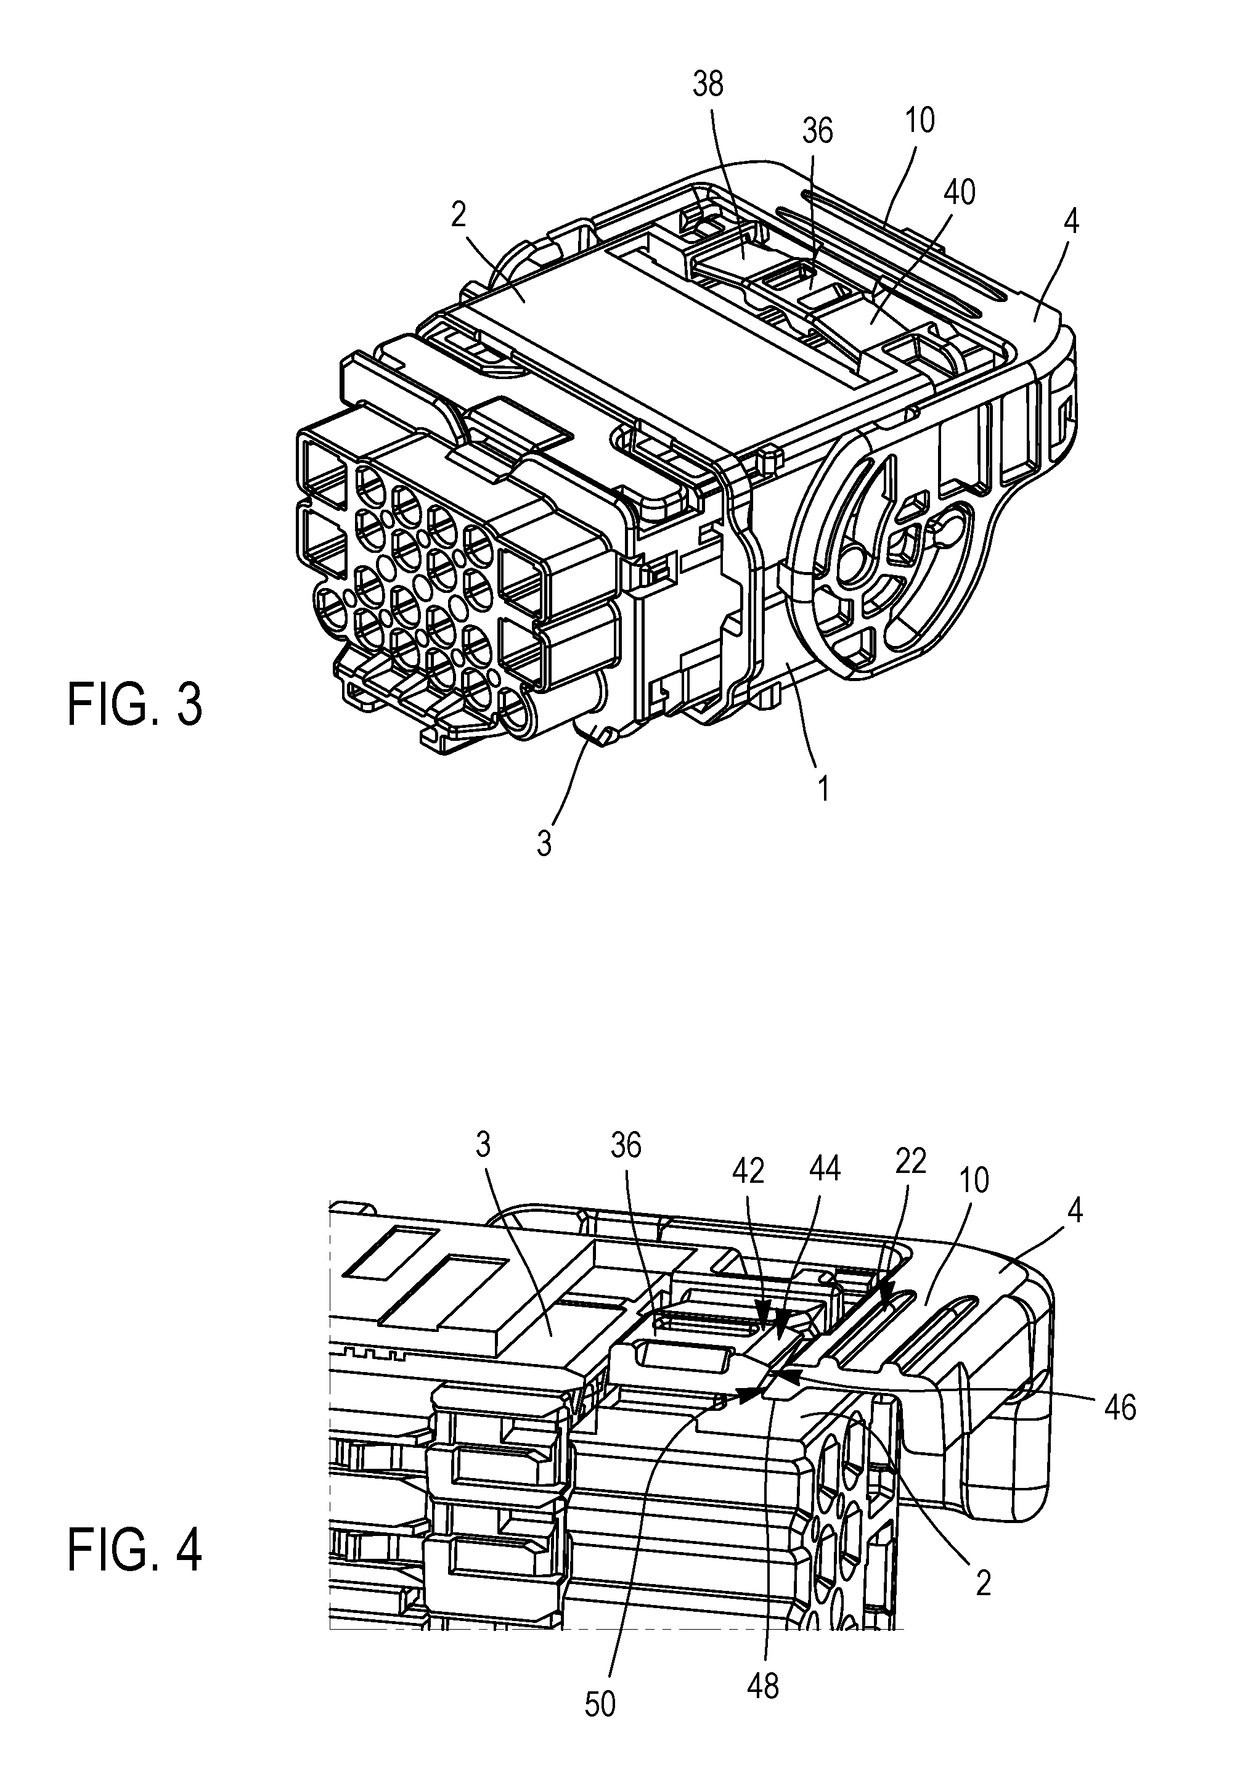 Connector having locking of the lever for facilitating the connection